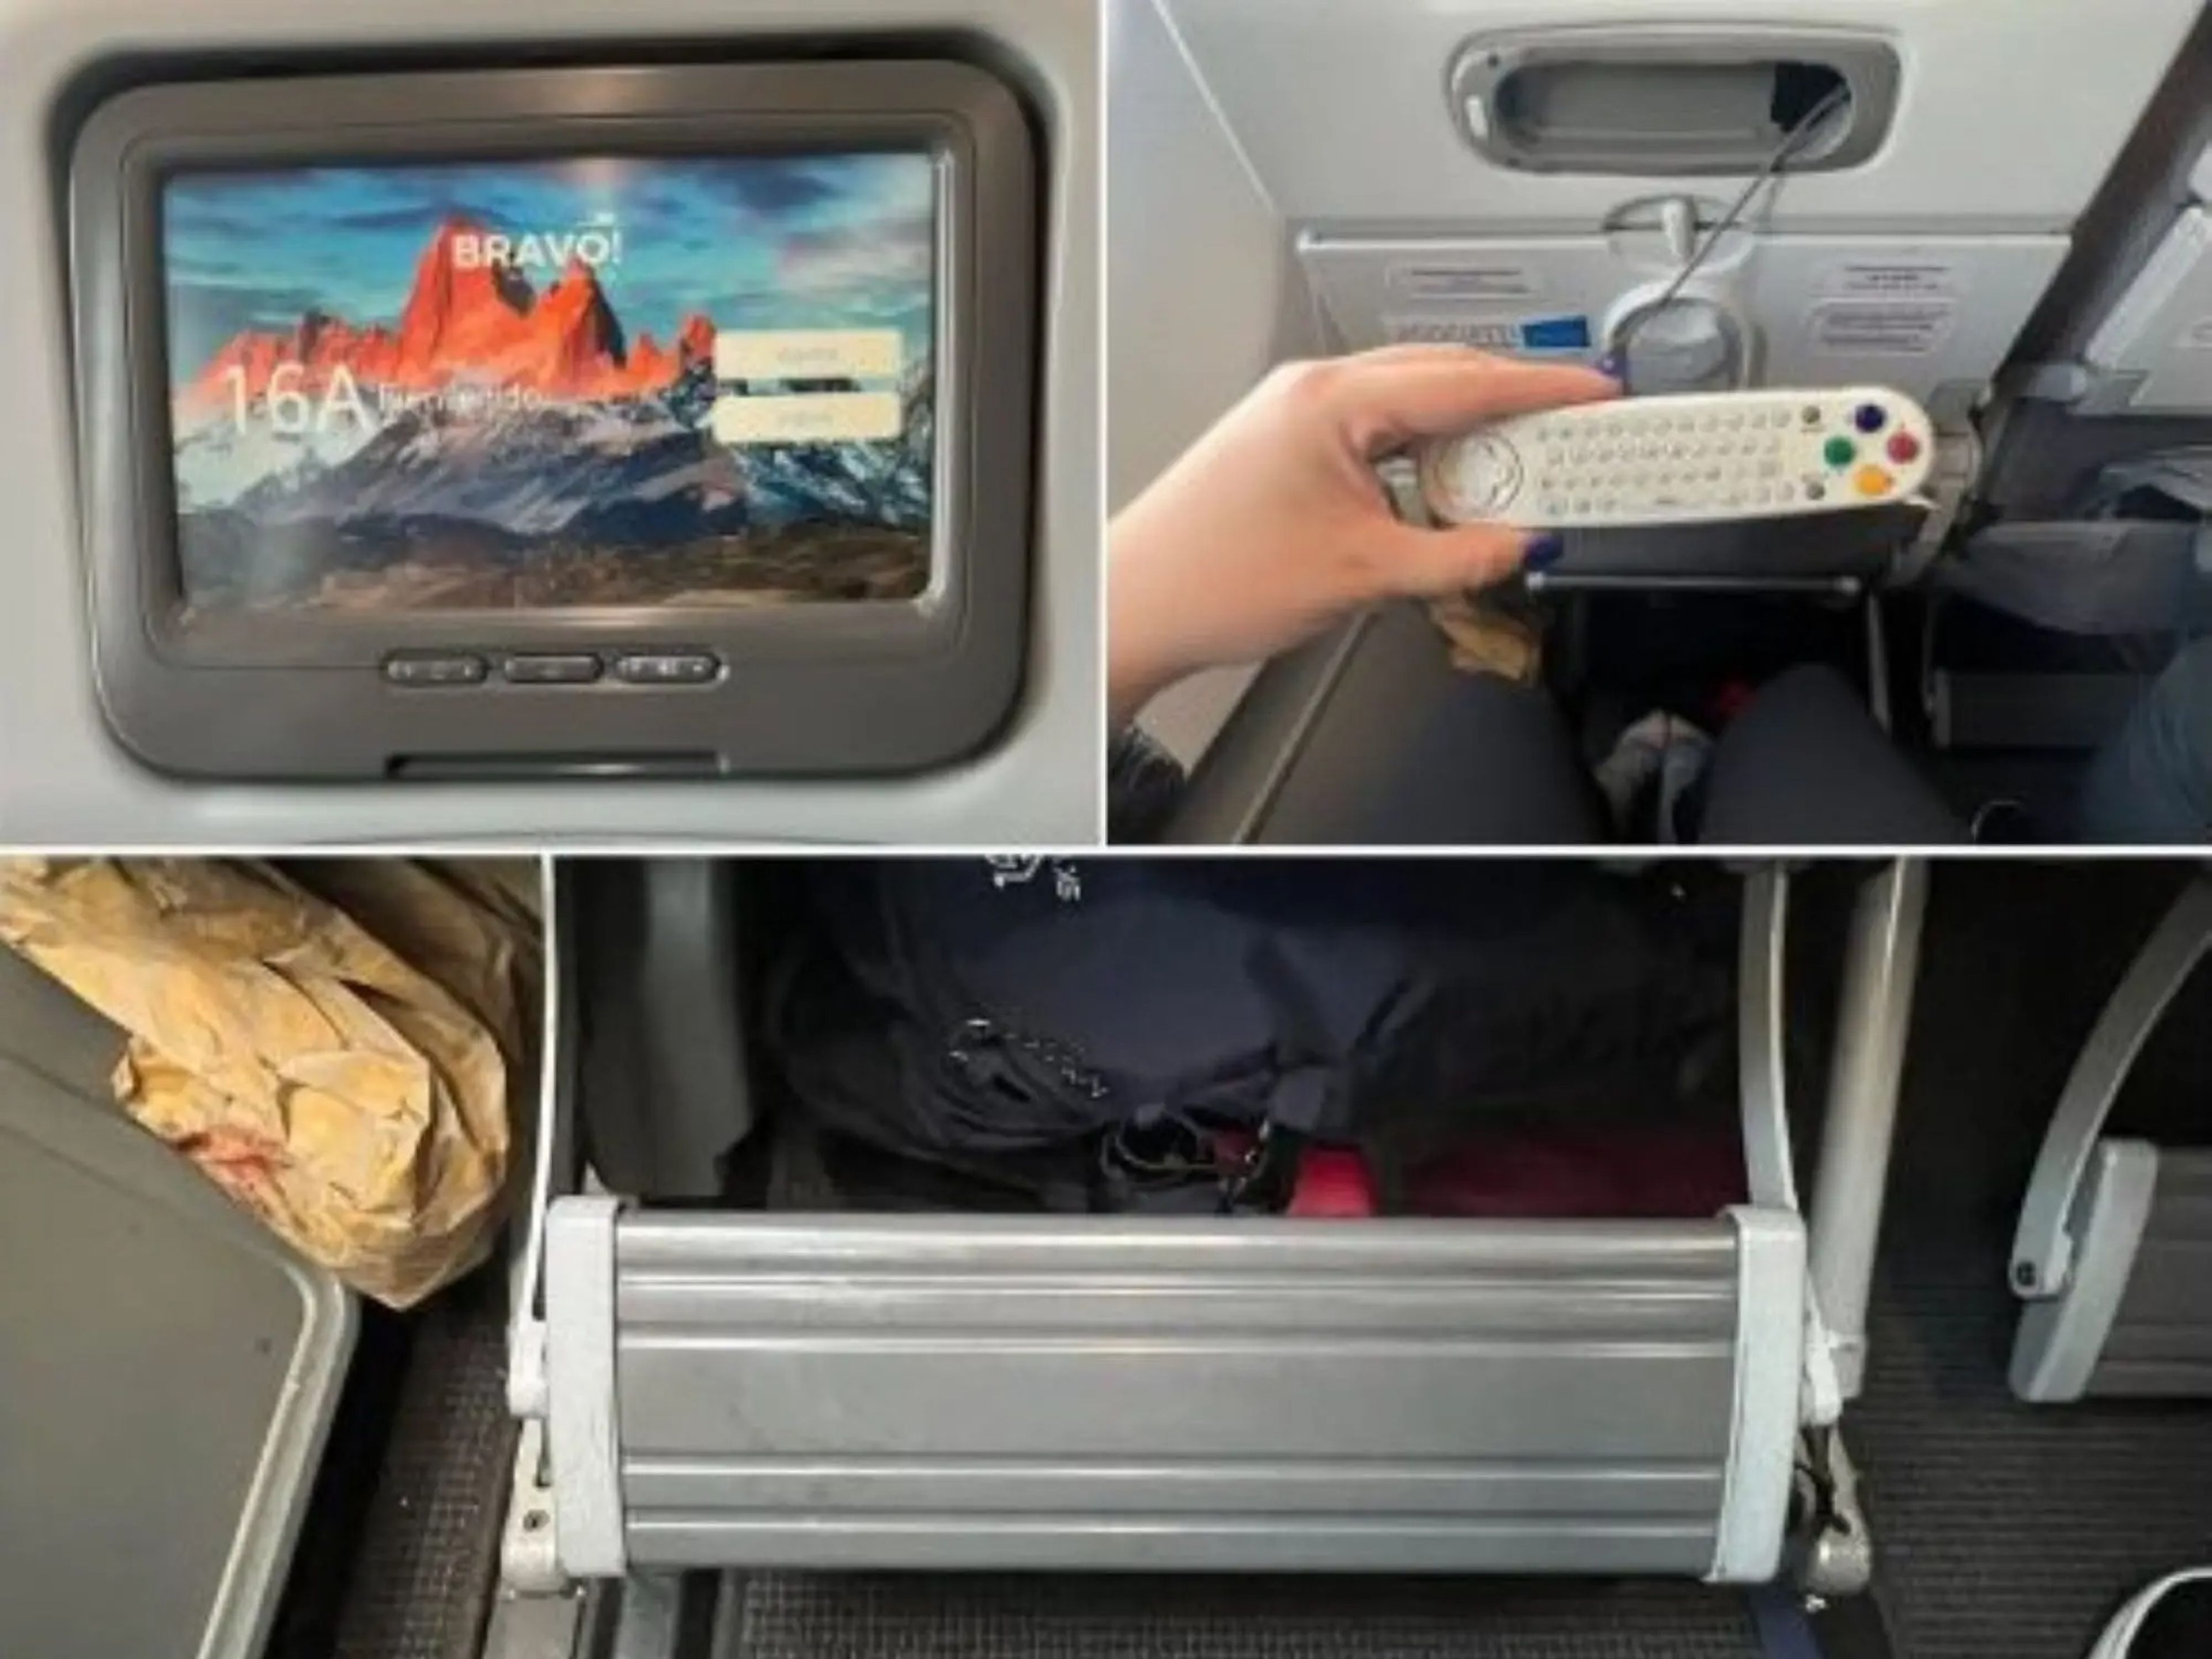 The amenities on Aerolineas including the TV, remote, and footrest.